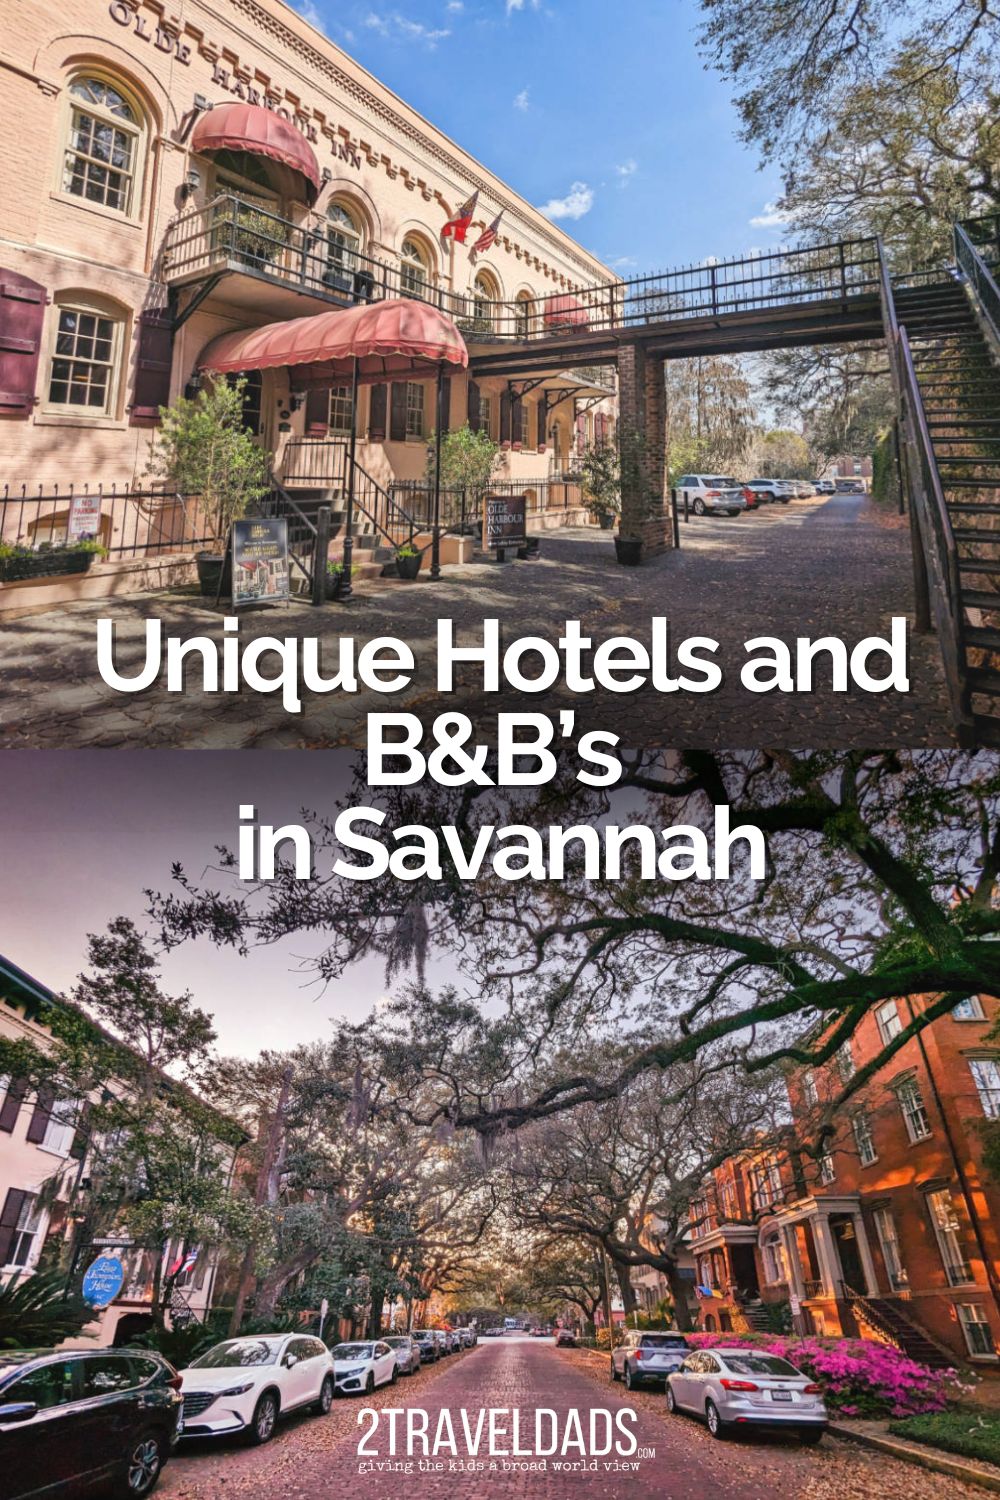 Savannah has plenty of places to stay when you visit. But the hotels in Savanah's historic district are something exceptionally special. If you want to add a little history to your visit, we have a list of some great places to stay that will take you back in time.